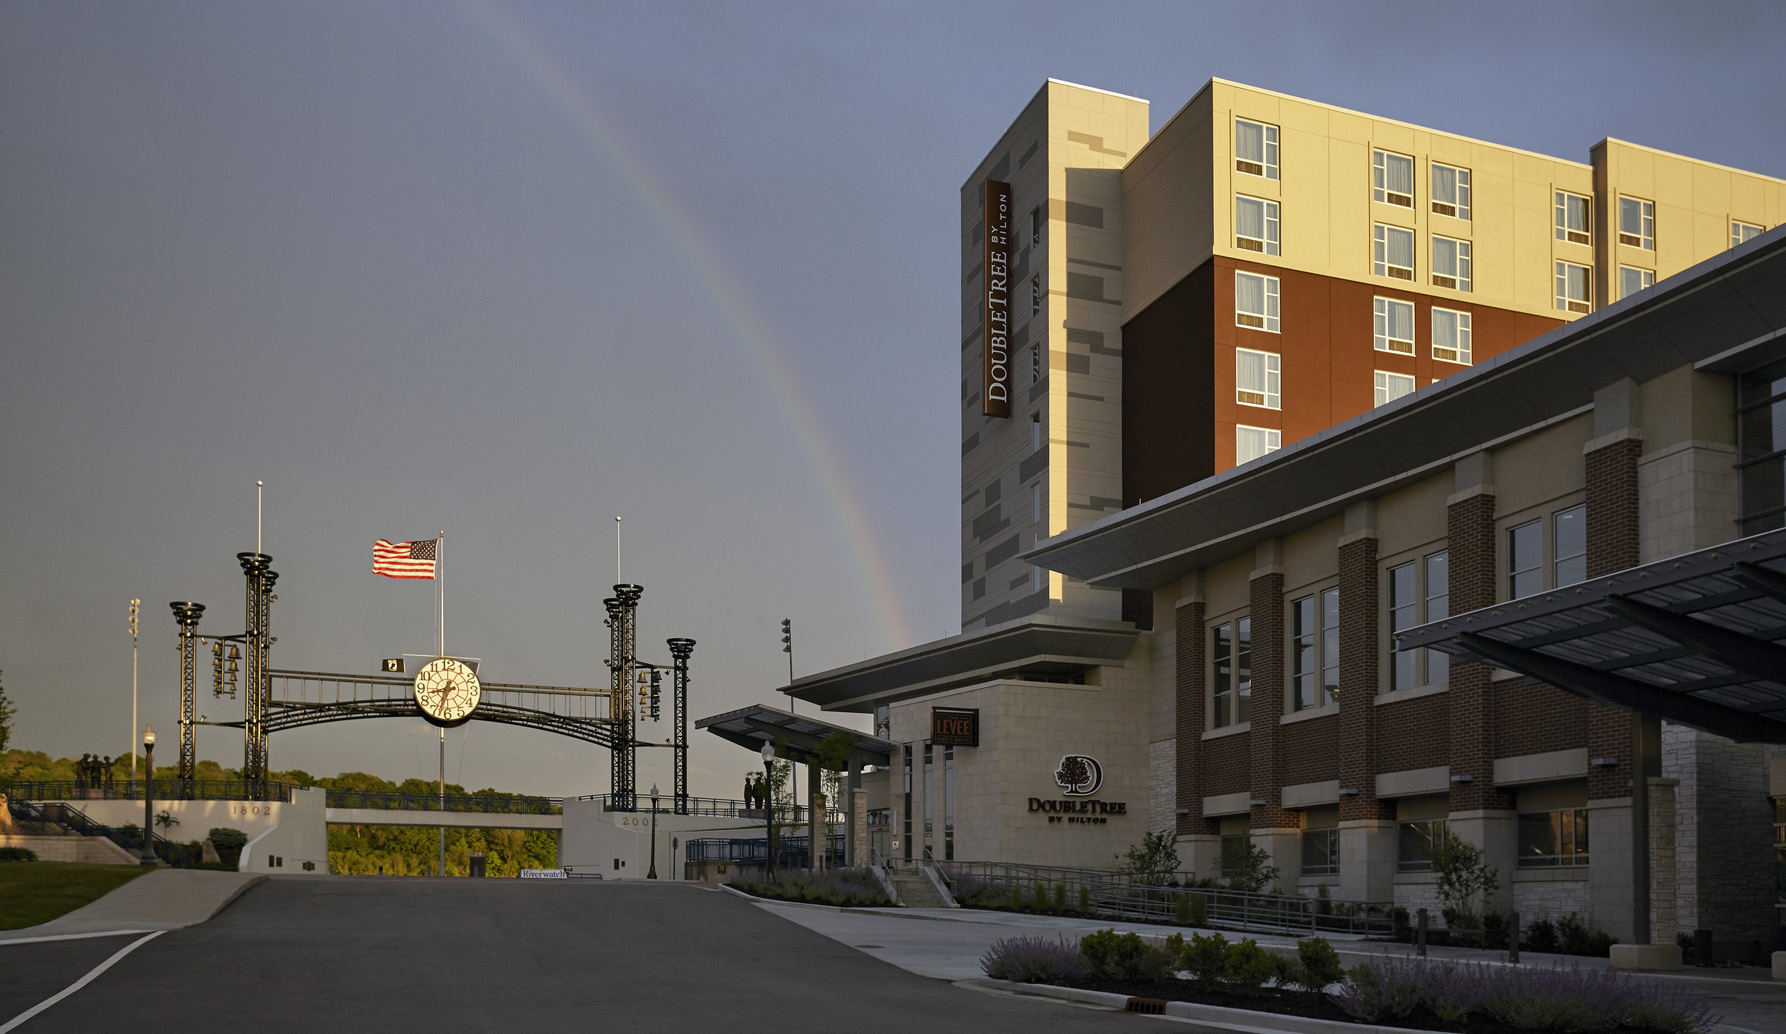 Doubletree Hotel and Lawrenceburg Event Center